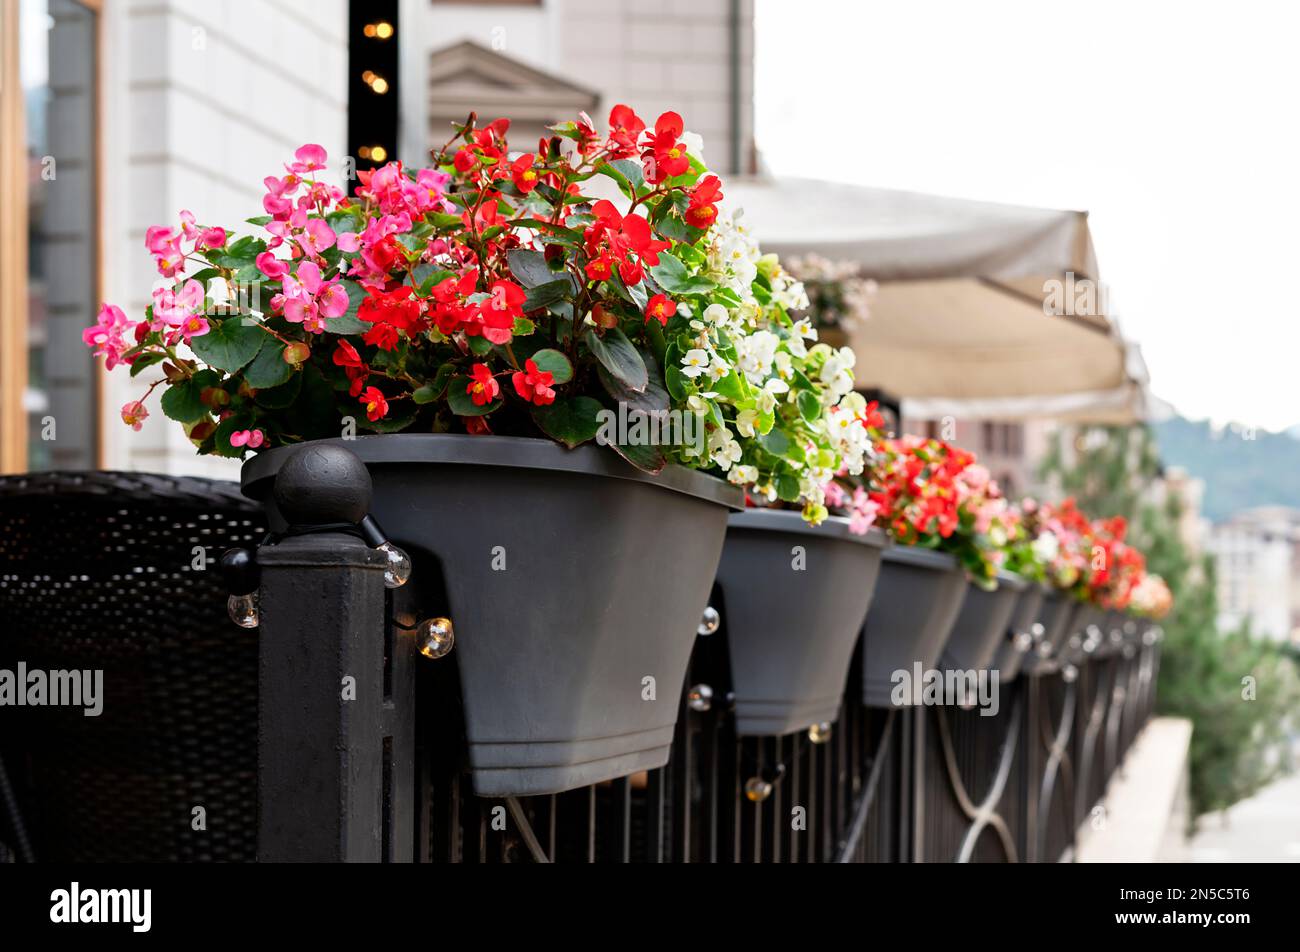 Begonia cucullata pink red and white flowers in outdoor pots landscaping city gardening potted flowering plants greenery concept botanical wax begonia Stock Photo